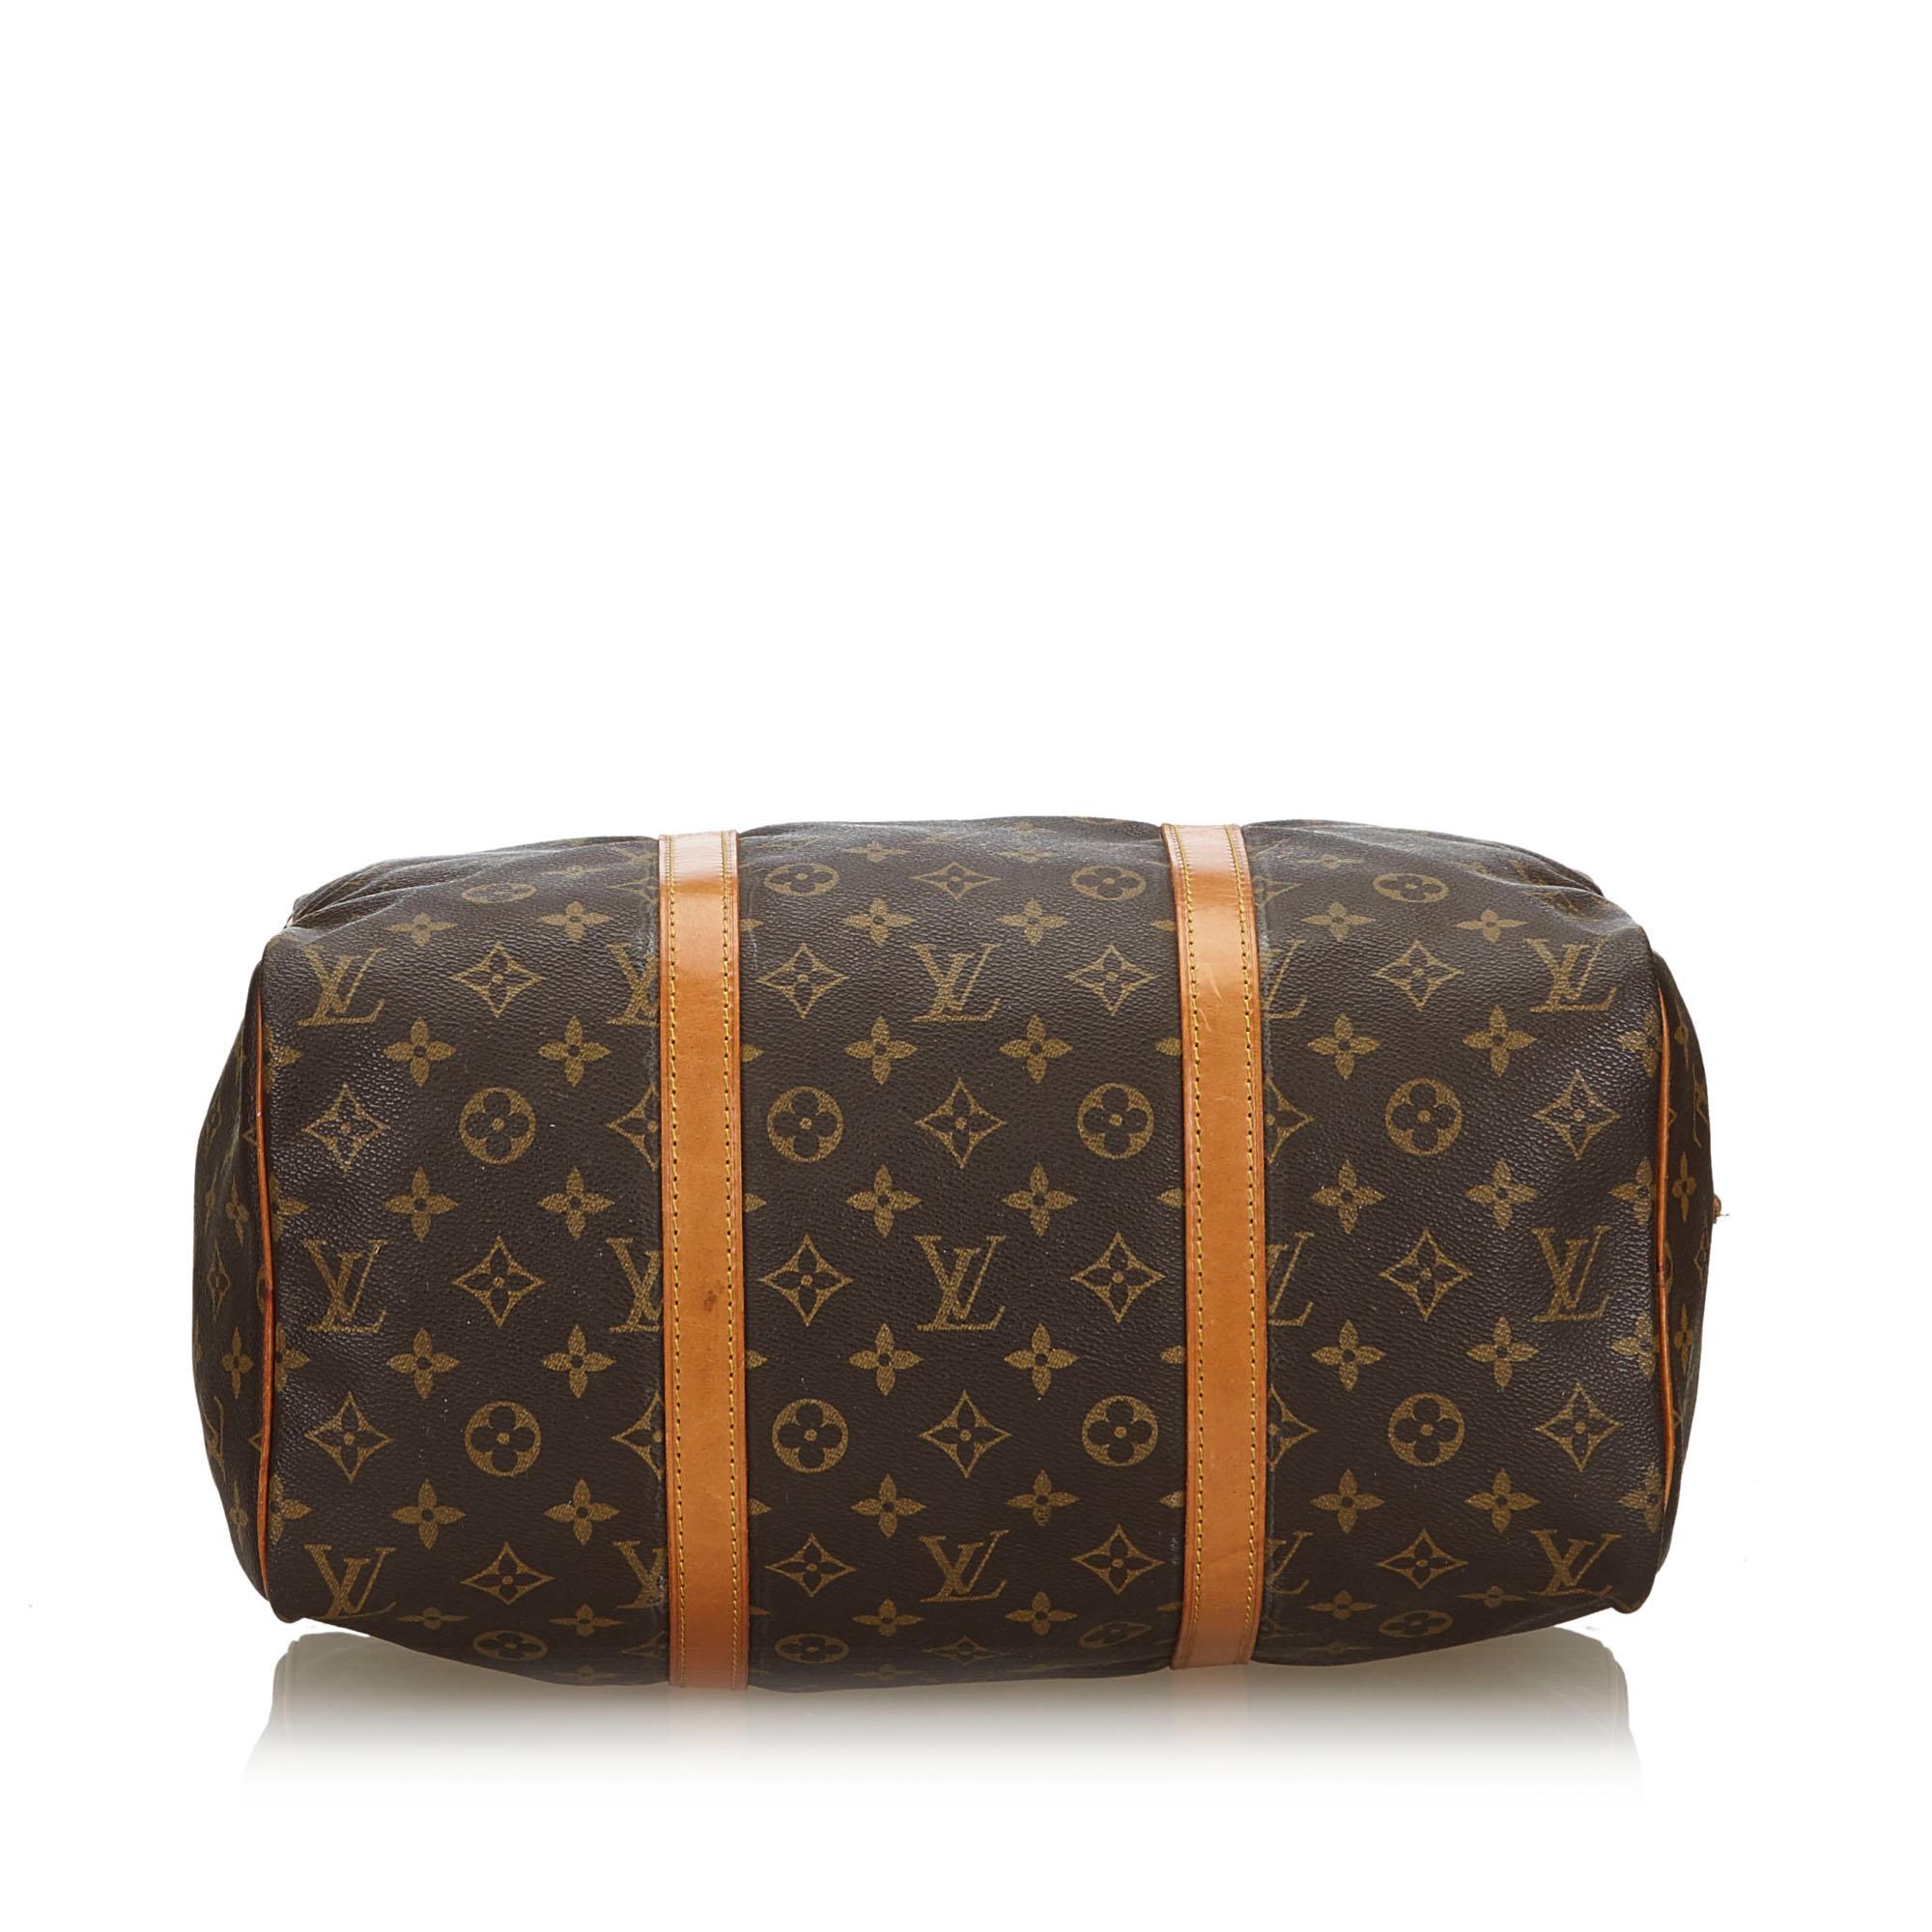 Vintage Authentic Louis Vuitton Brown Sac Souple 35 FRANCE w LARGE  In Good Condition For Sale In Orlando, FL